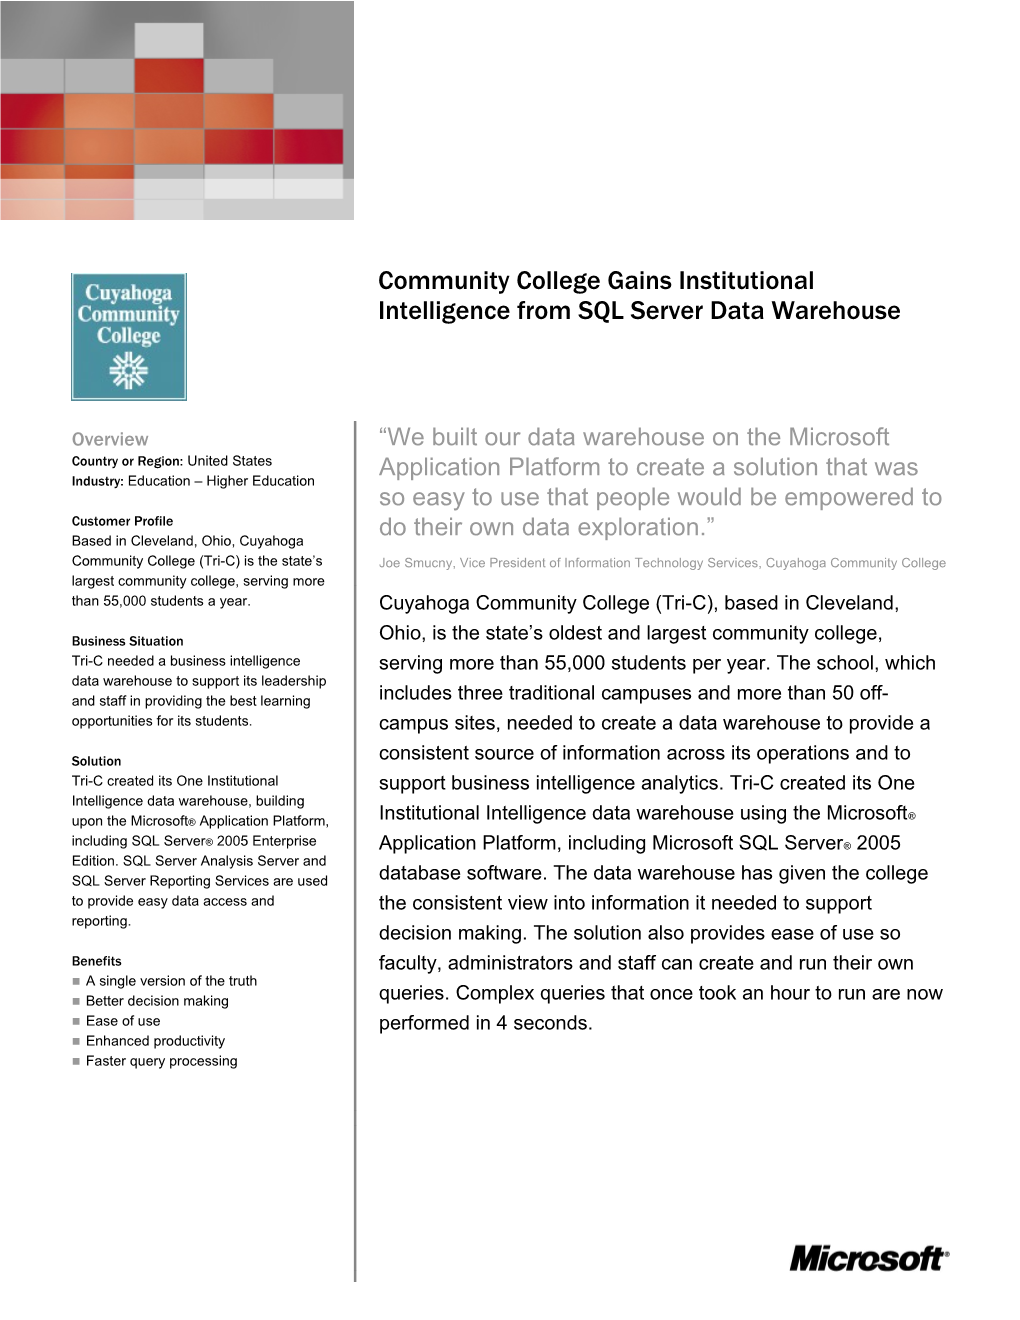 Community College Gains Institutional Intelligence from SQL Server Data Warehouse